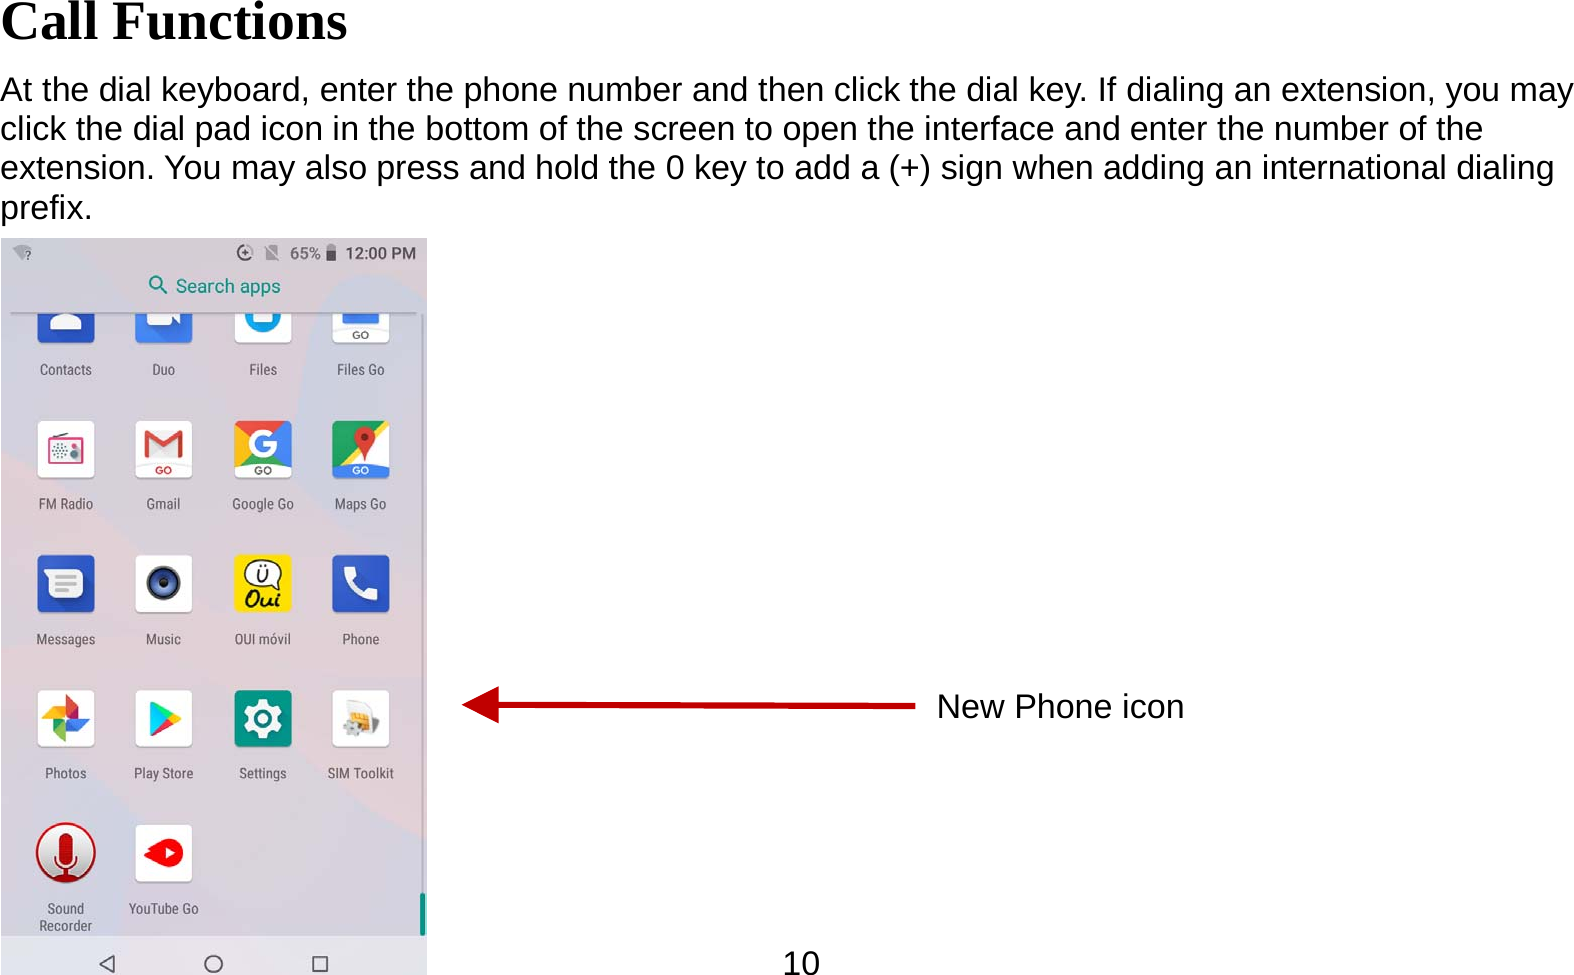   10Call Functions                                        At the dial keyboard, enter the phone number and then click the dial key. If dialing an extension, you may click the dial pad icon in the bottom of the screen to open the interface and enter the number of the extension. You may also press and hold the 0 key to add a (+) sign when adding an international dialing prefix.   New Phone icon 